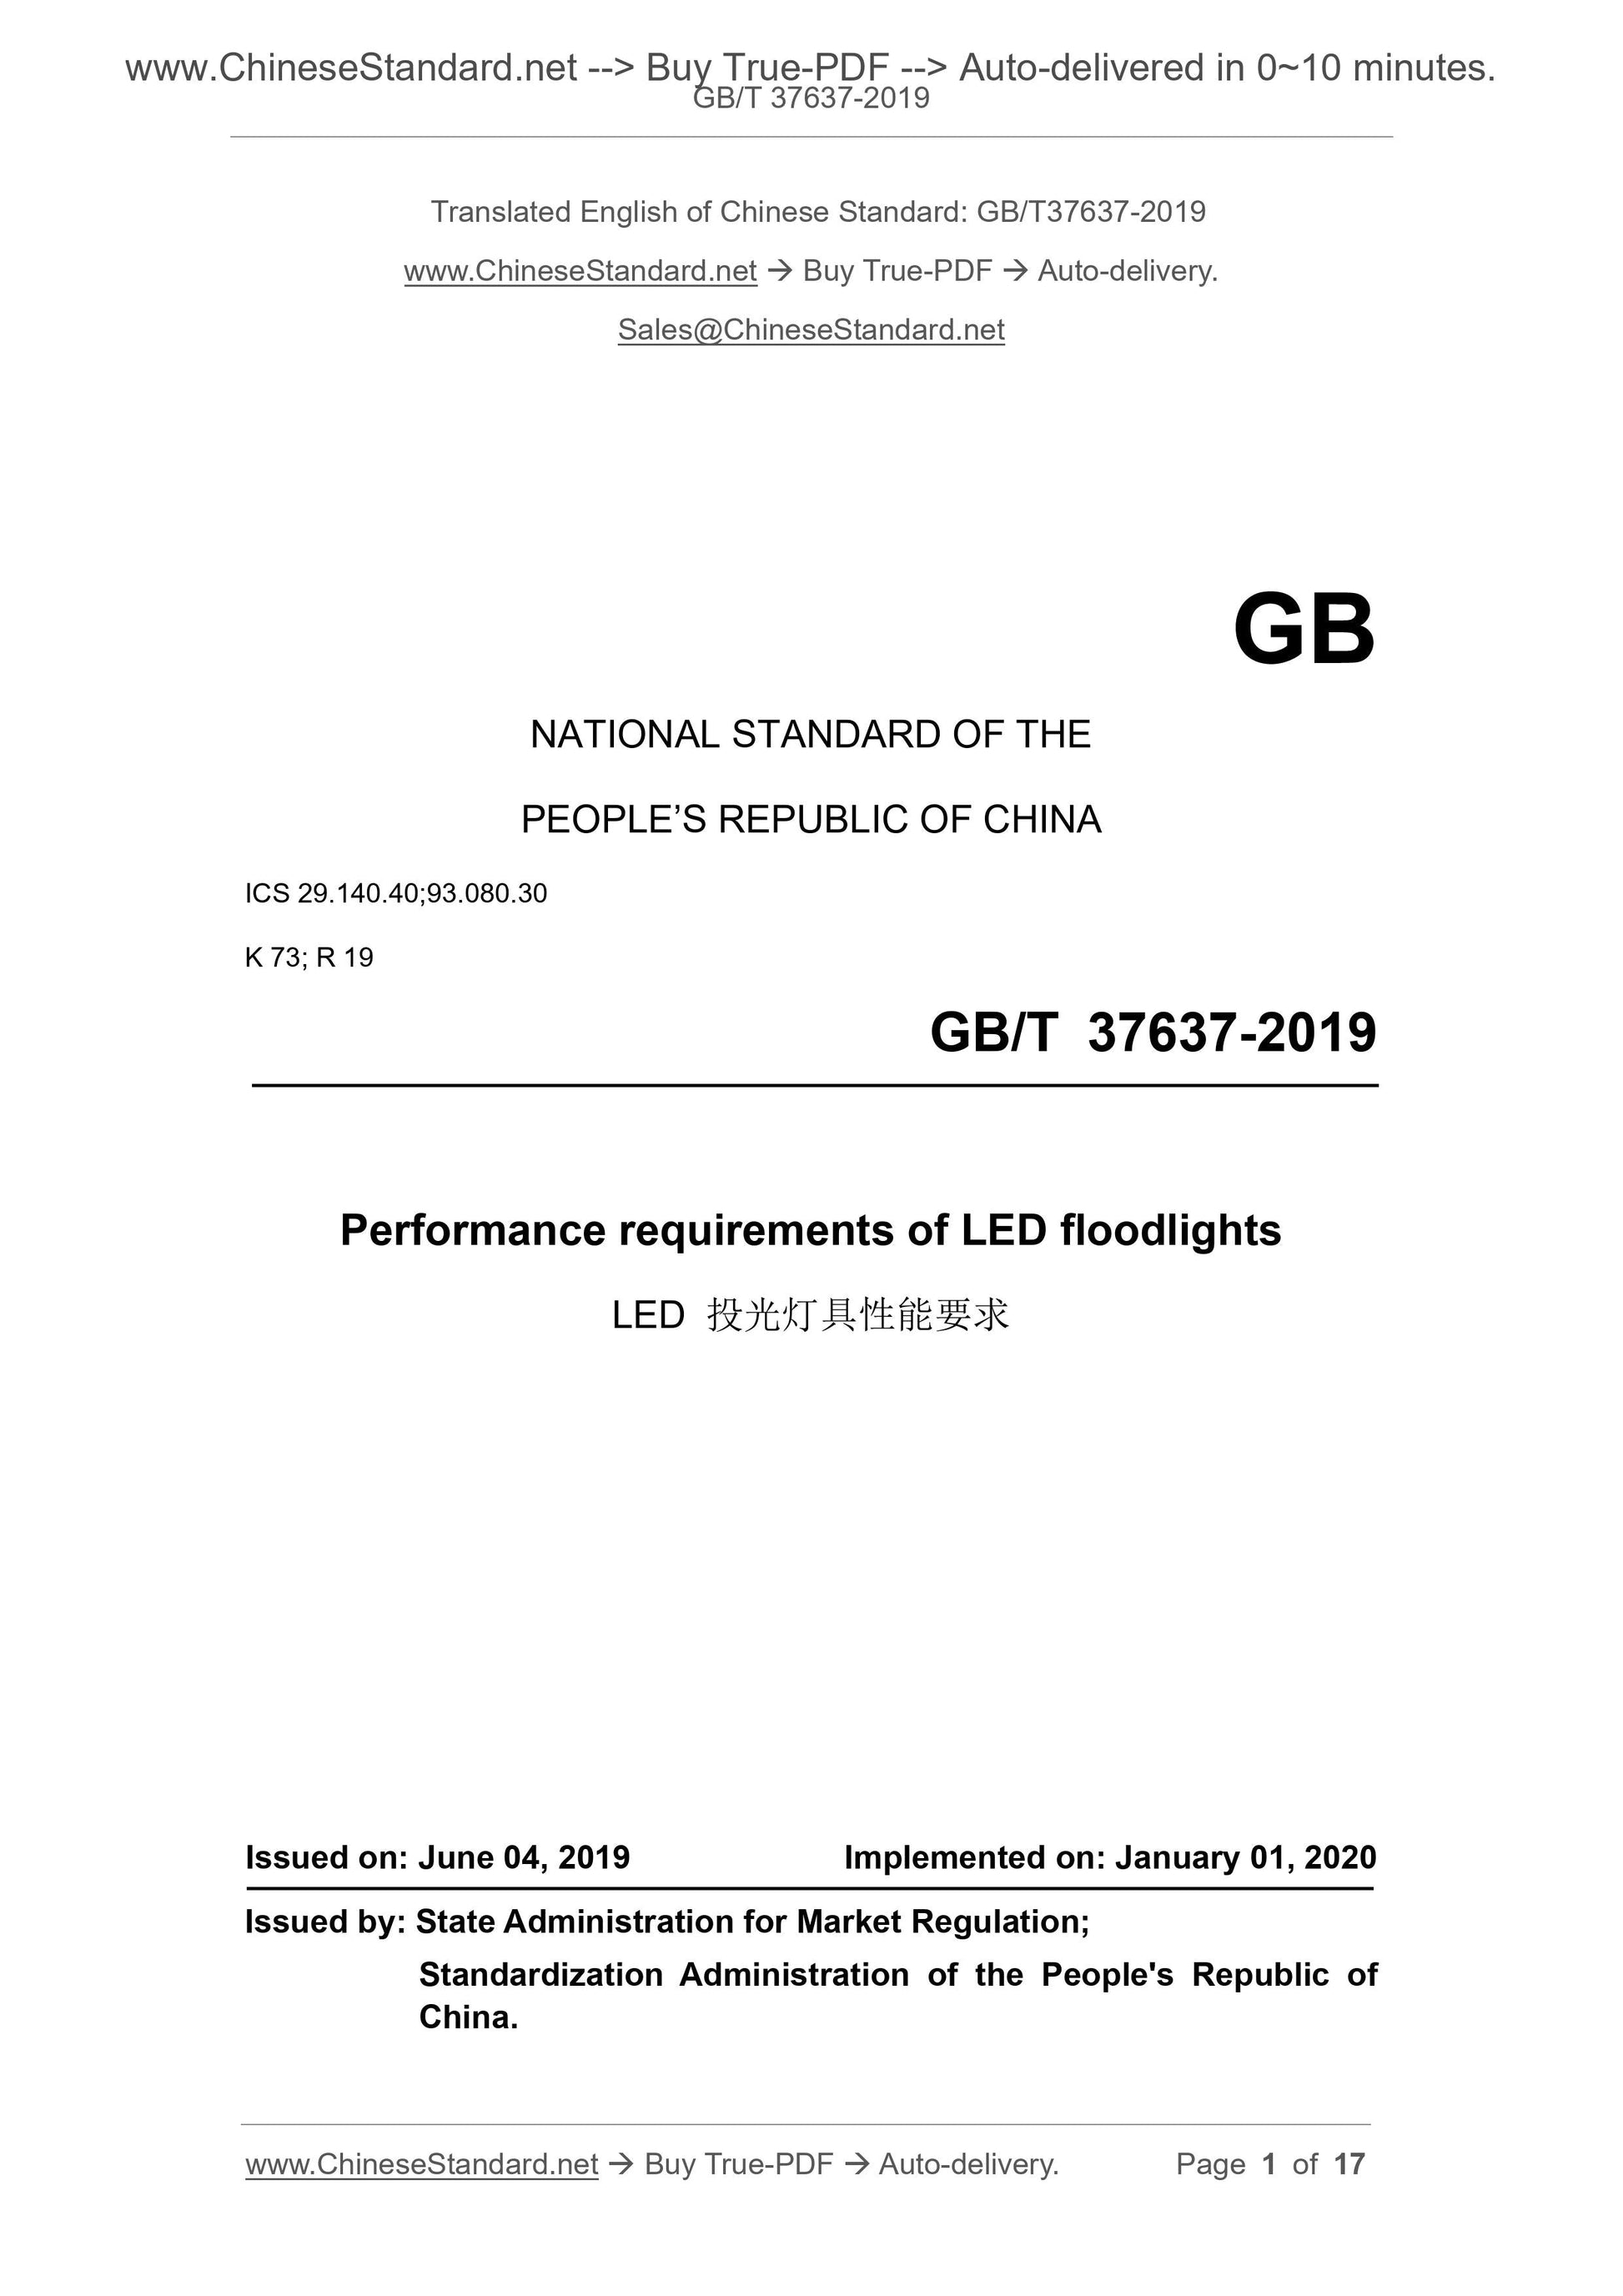 GB/T 37637-2019 Page 1